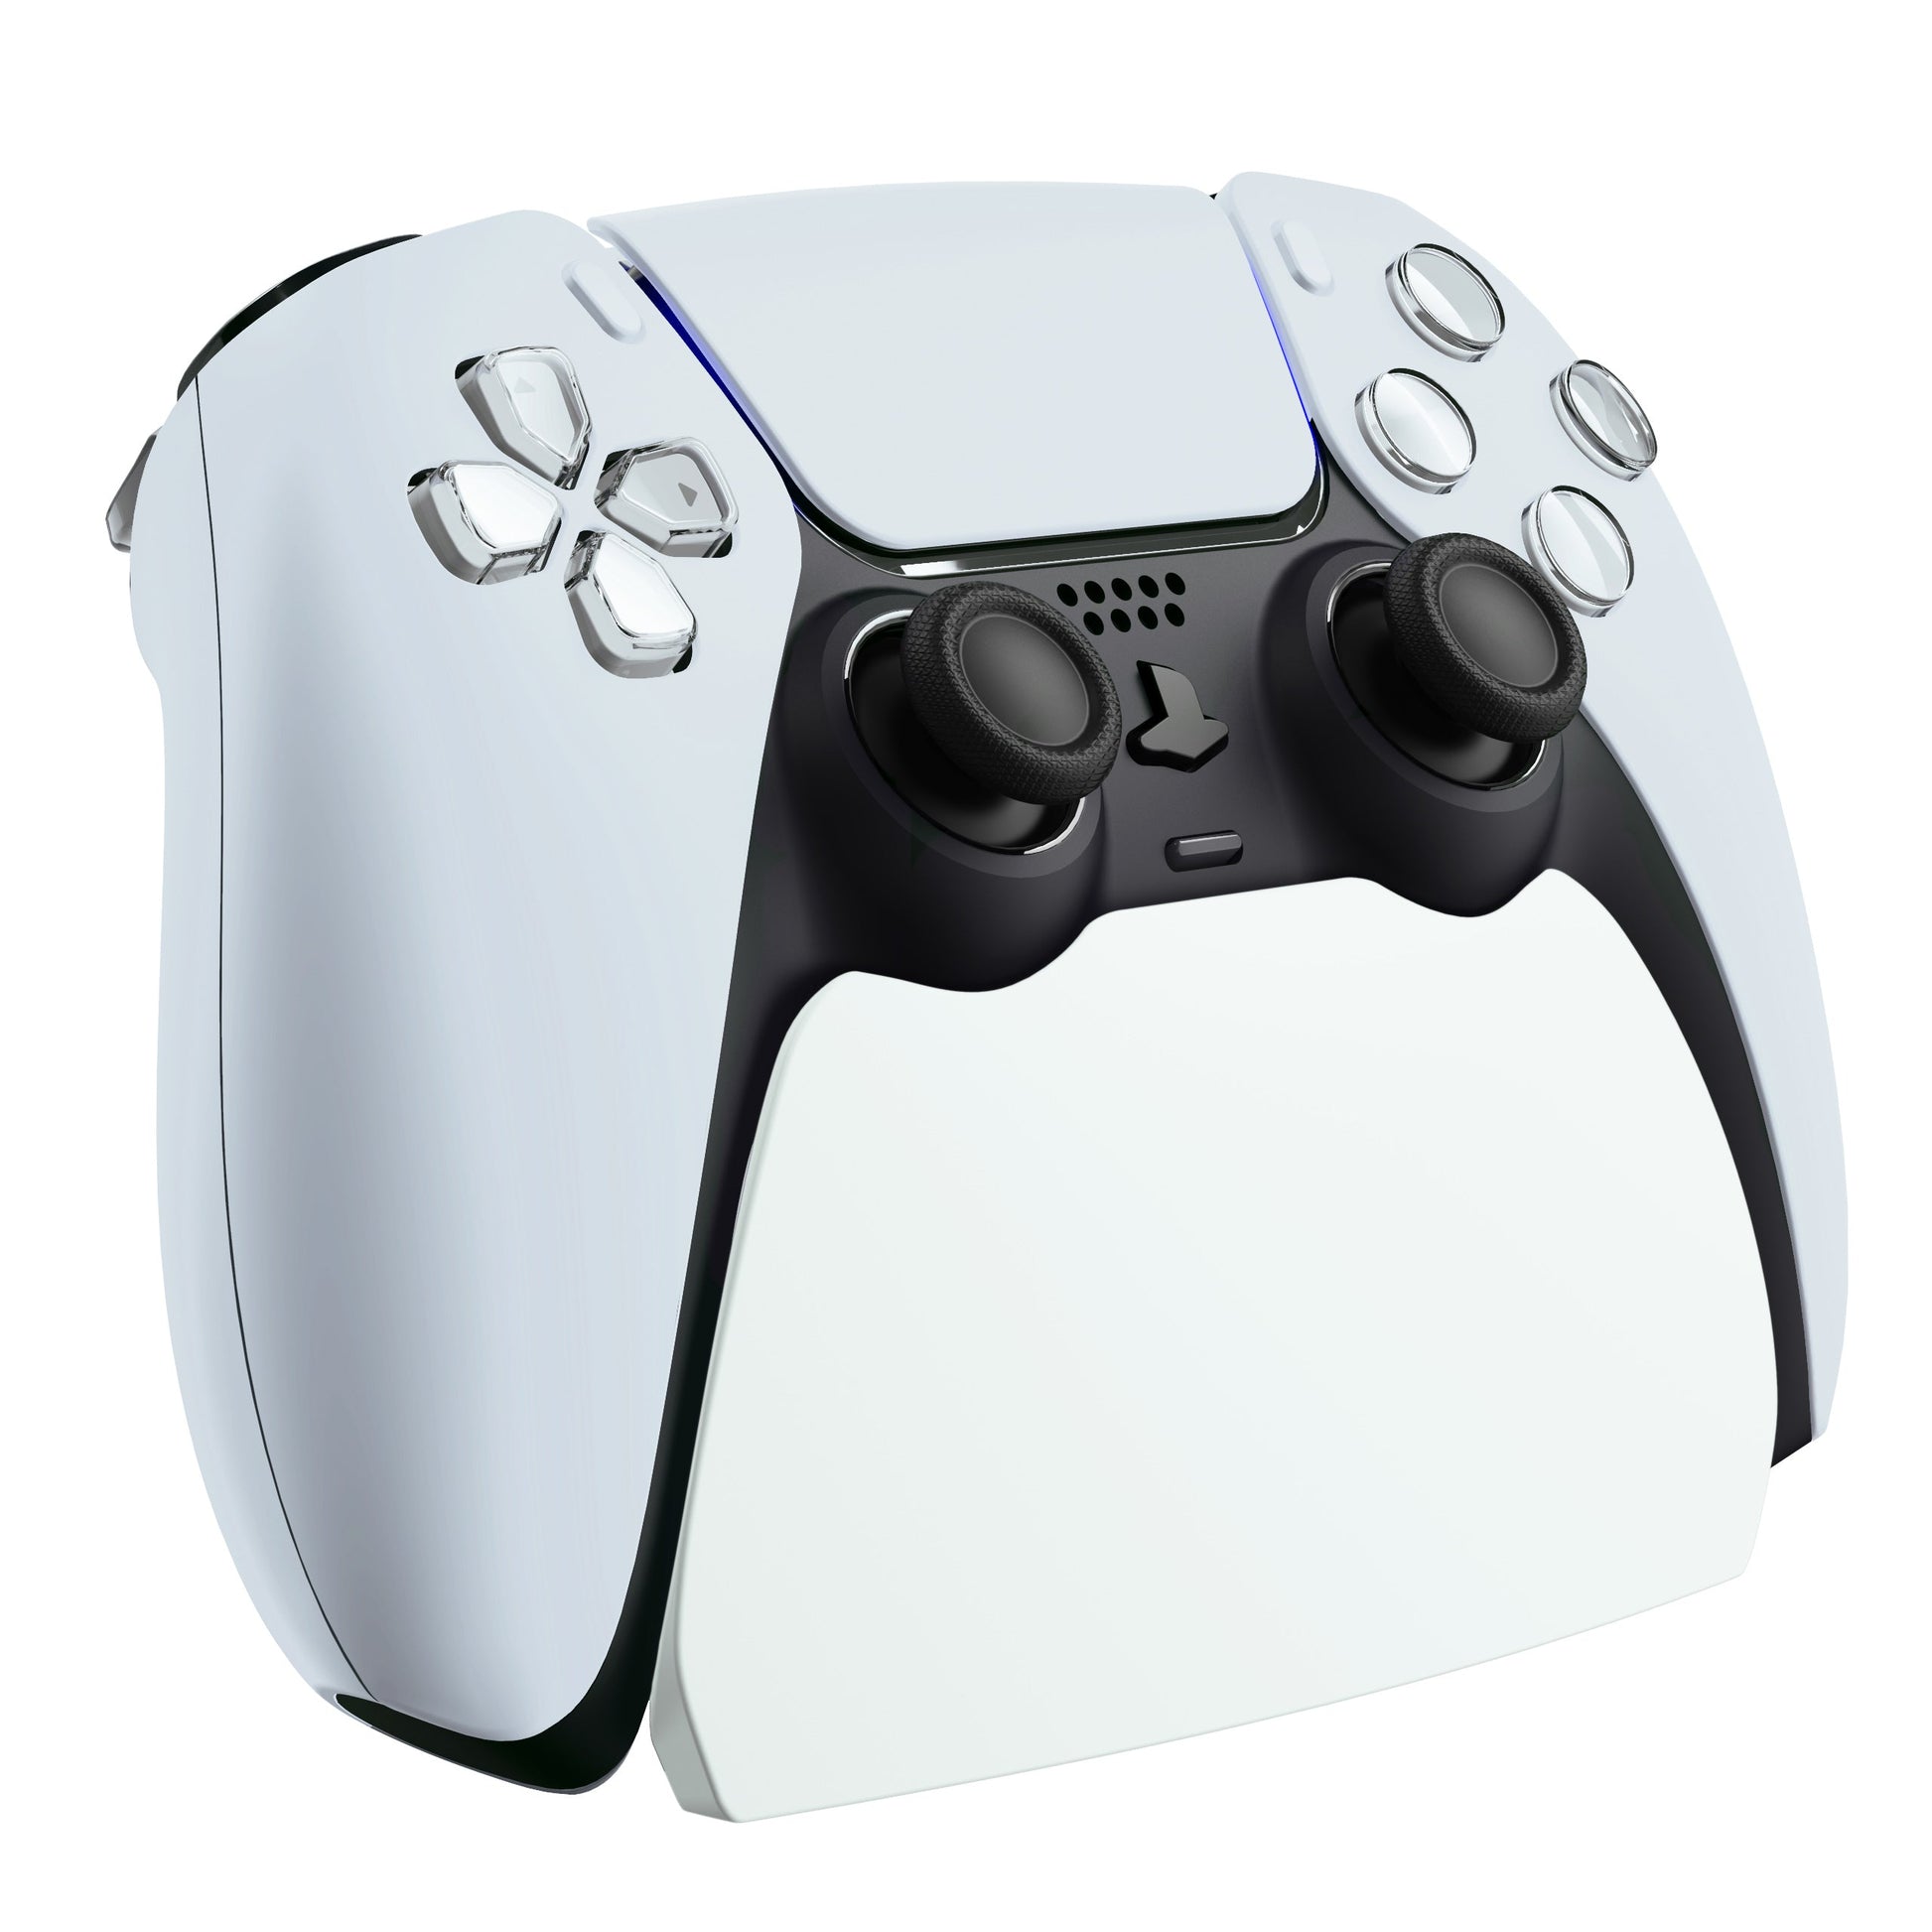 PlayVital Solid White Controller Display Stand for PlayStation 5, Gamepad Accessories Desk Holder for PS5 Controller with Rubber Pads - PFPJ004 PlayVital